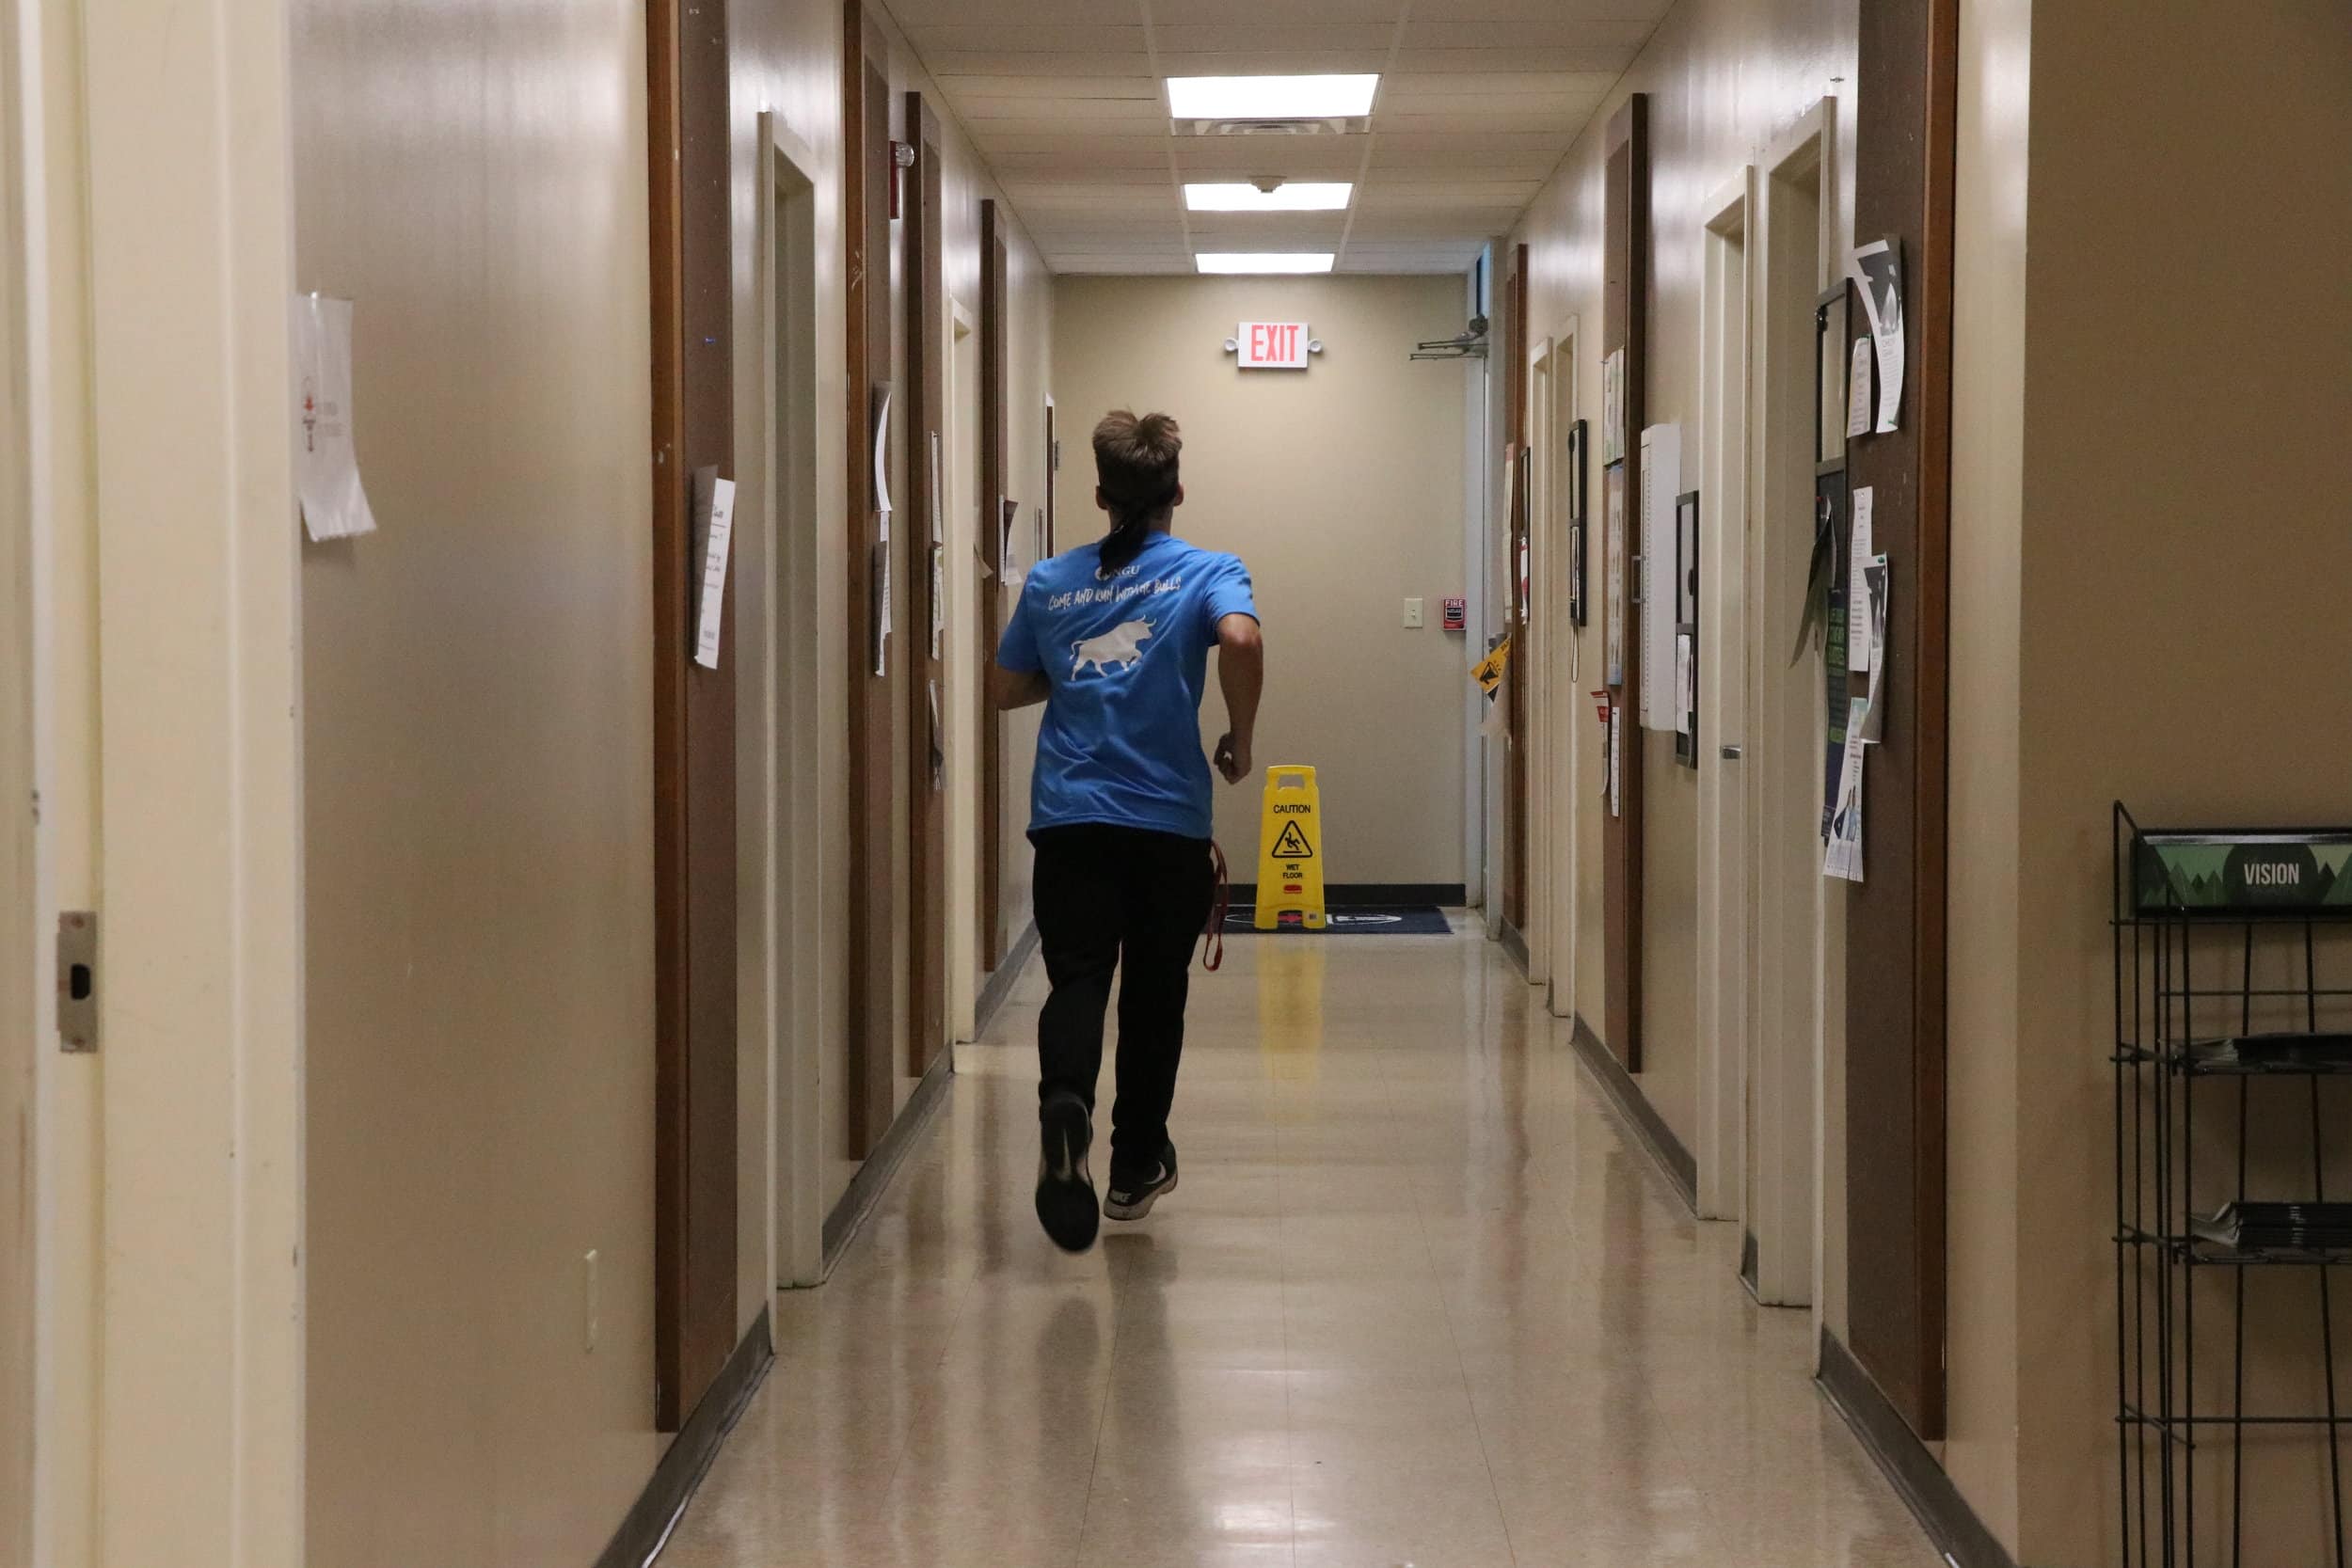 Jacob runs through the hall ways of Avery during a challenge called El Camino de Santiago. The challenge here was to walk or run a kilometer in under four minutes. Students had to start in the lobby of AV Wood, go upstairs, go down the stairs thro